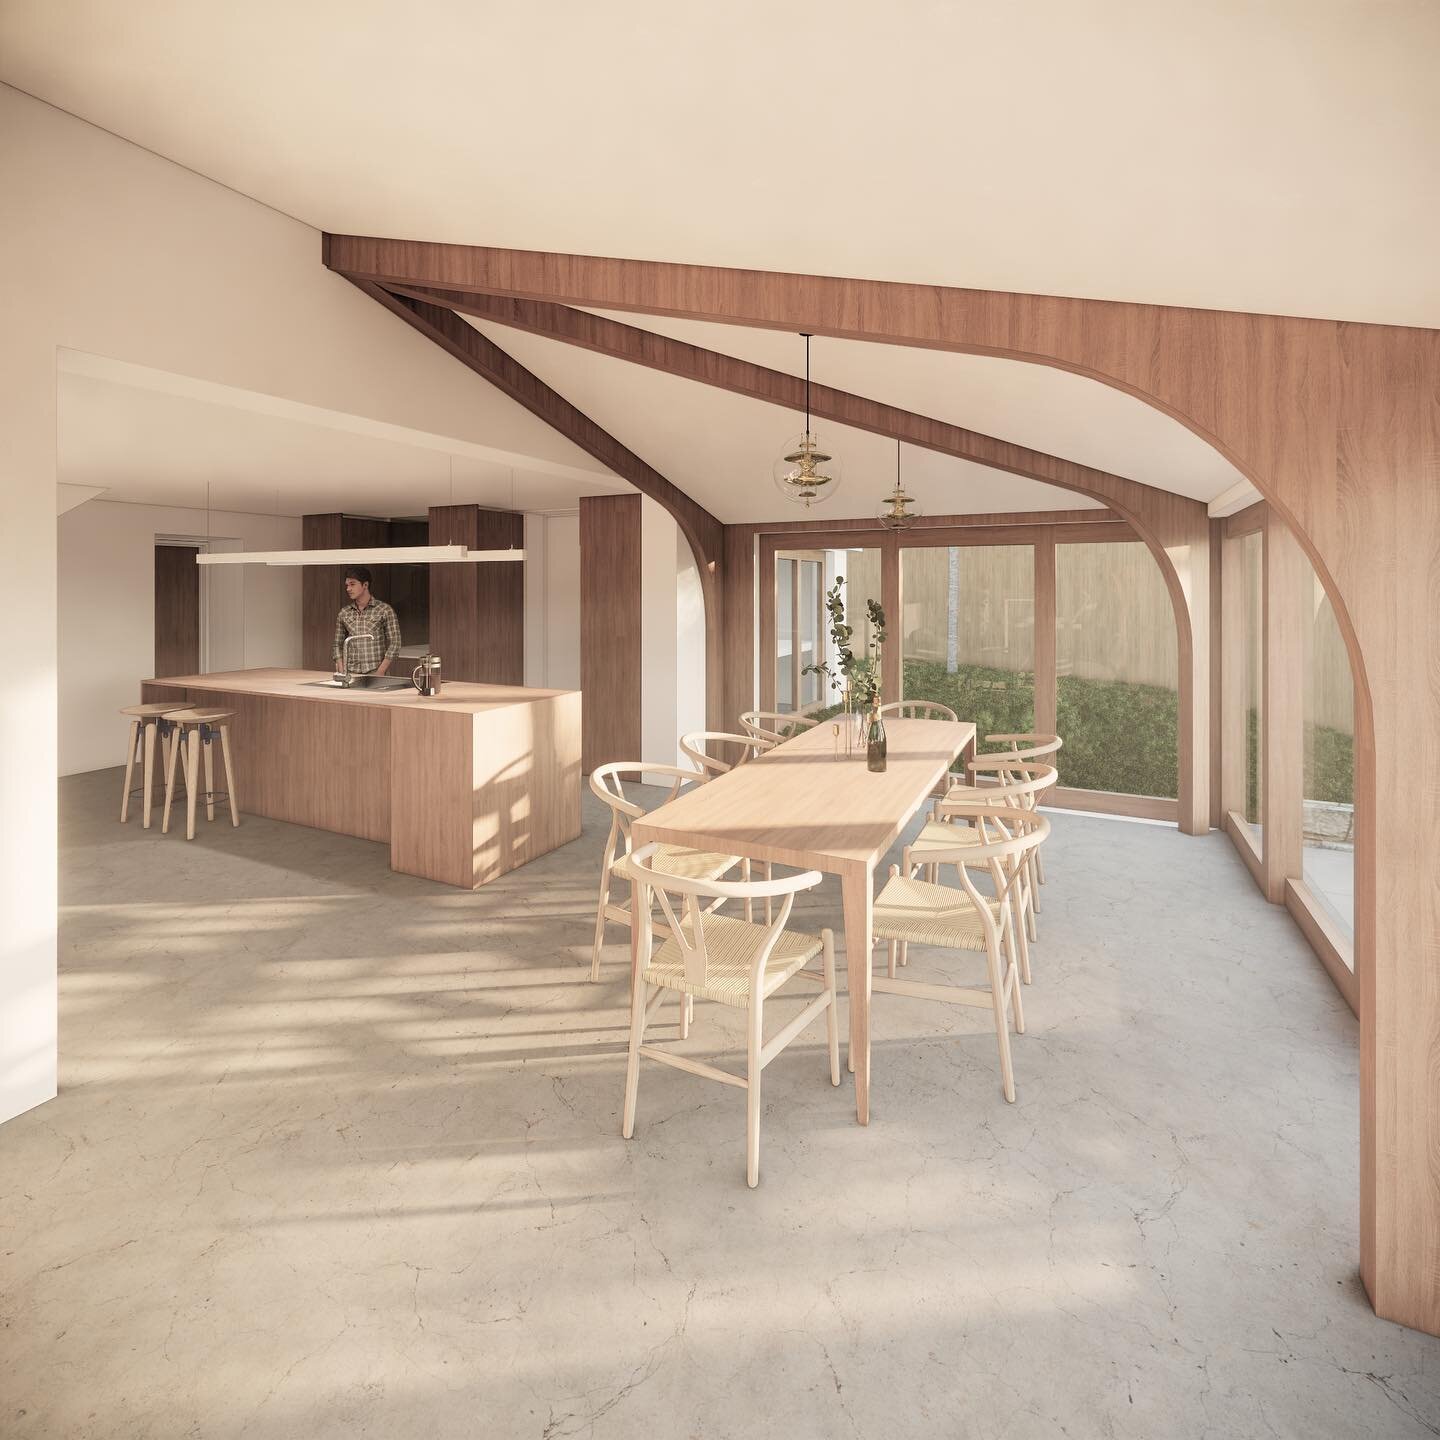 Planning Approval received today for alterations and extensions to a family home in Guernsey. #bemoresoup #oakframe